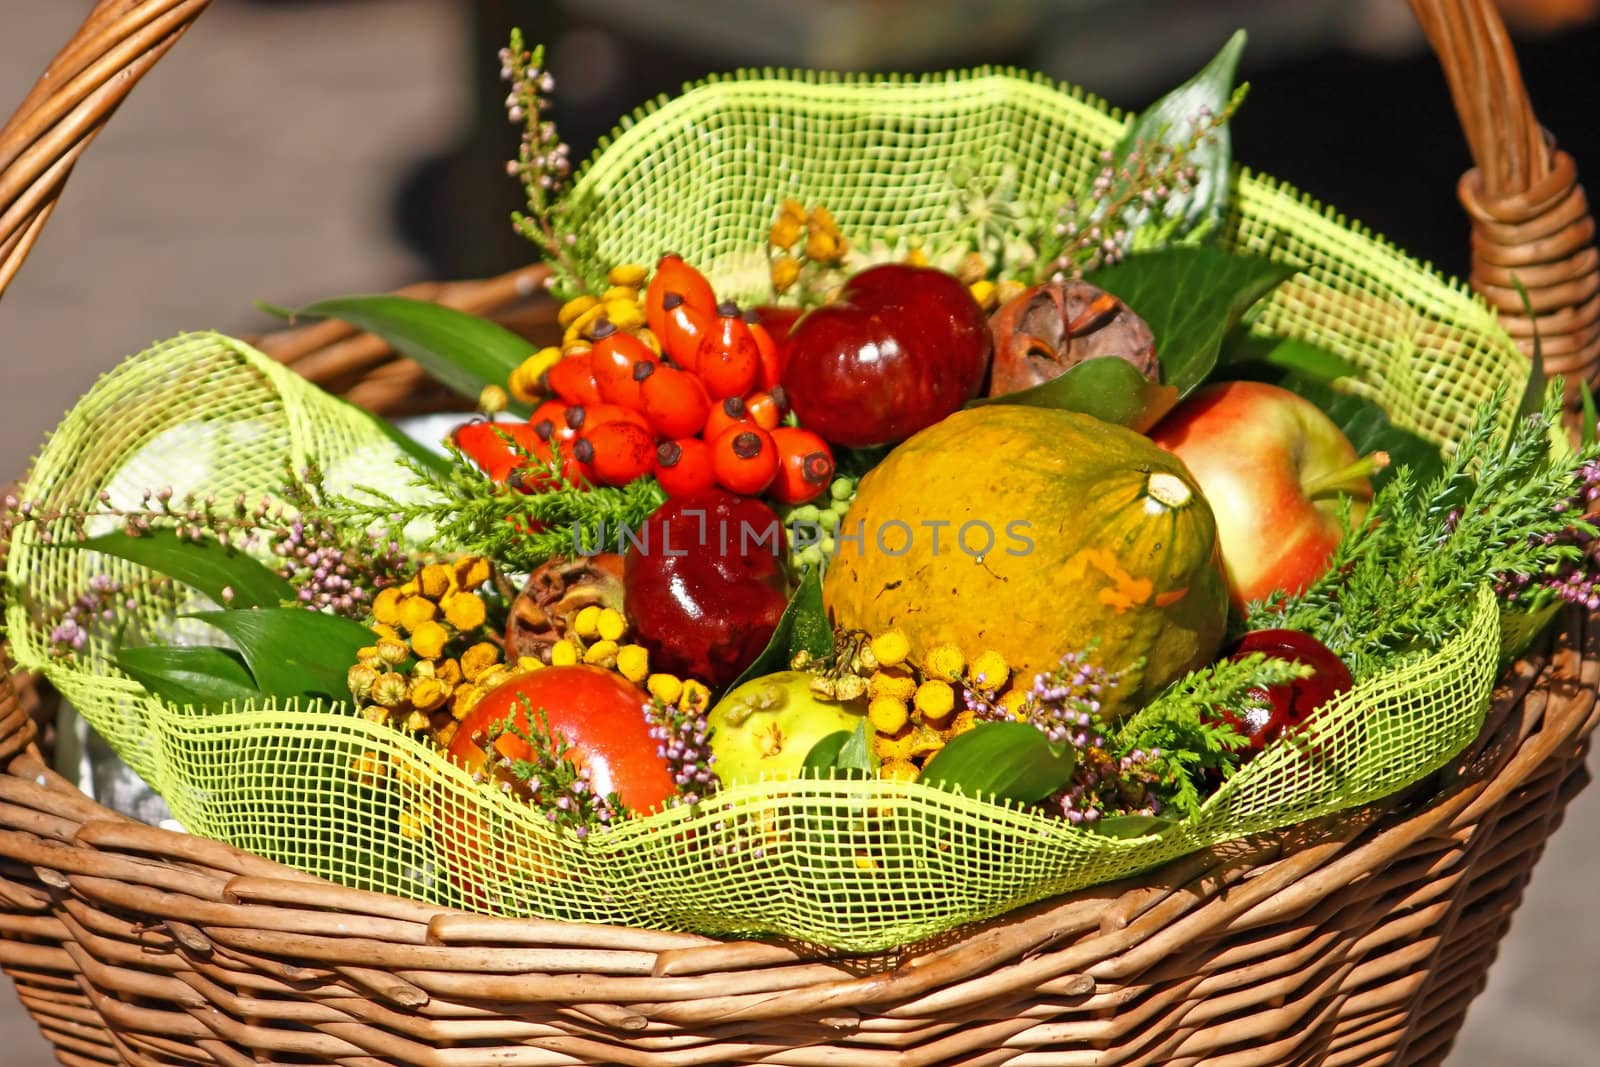 Basket ful of colorful, seasonal autumn fruits and vegetables